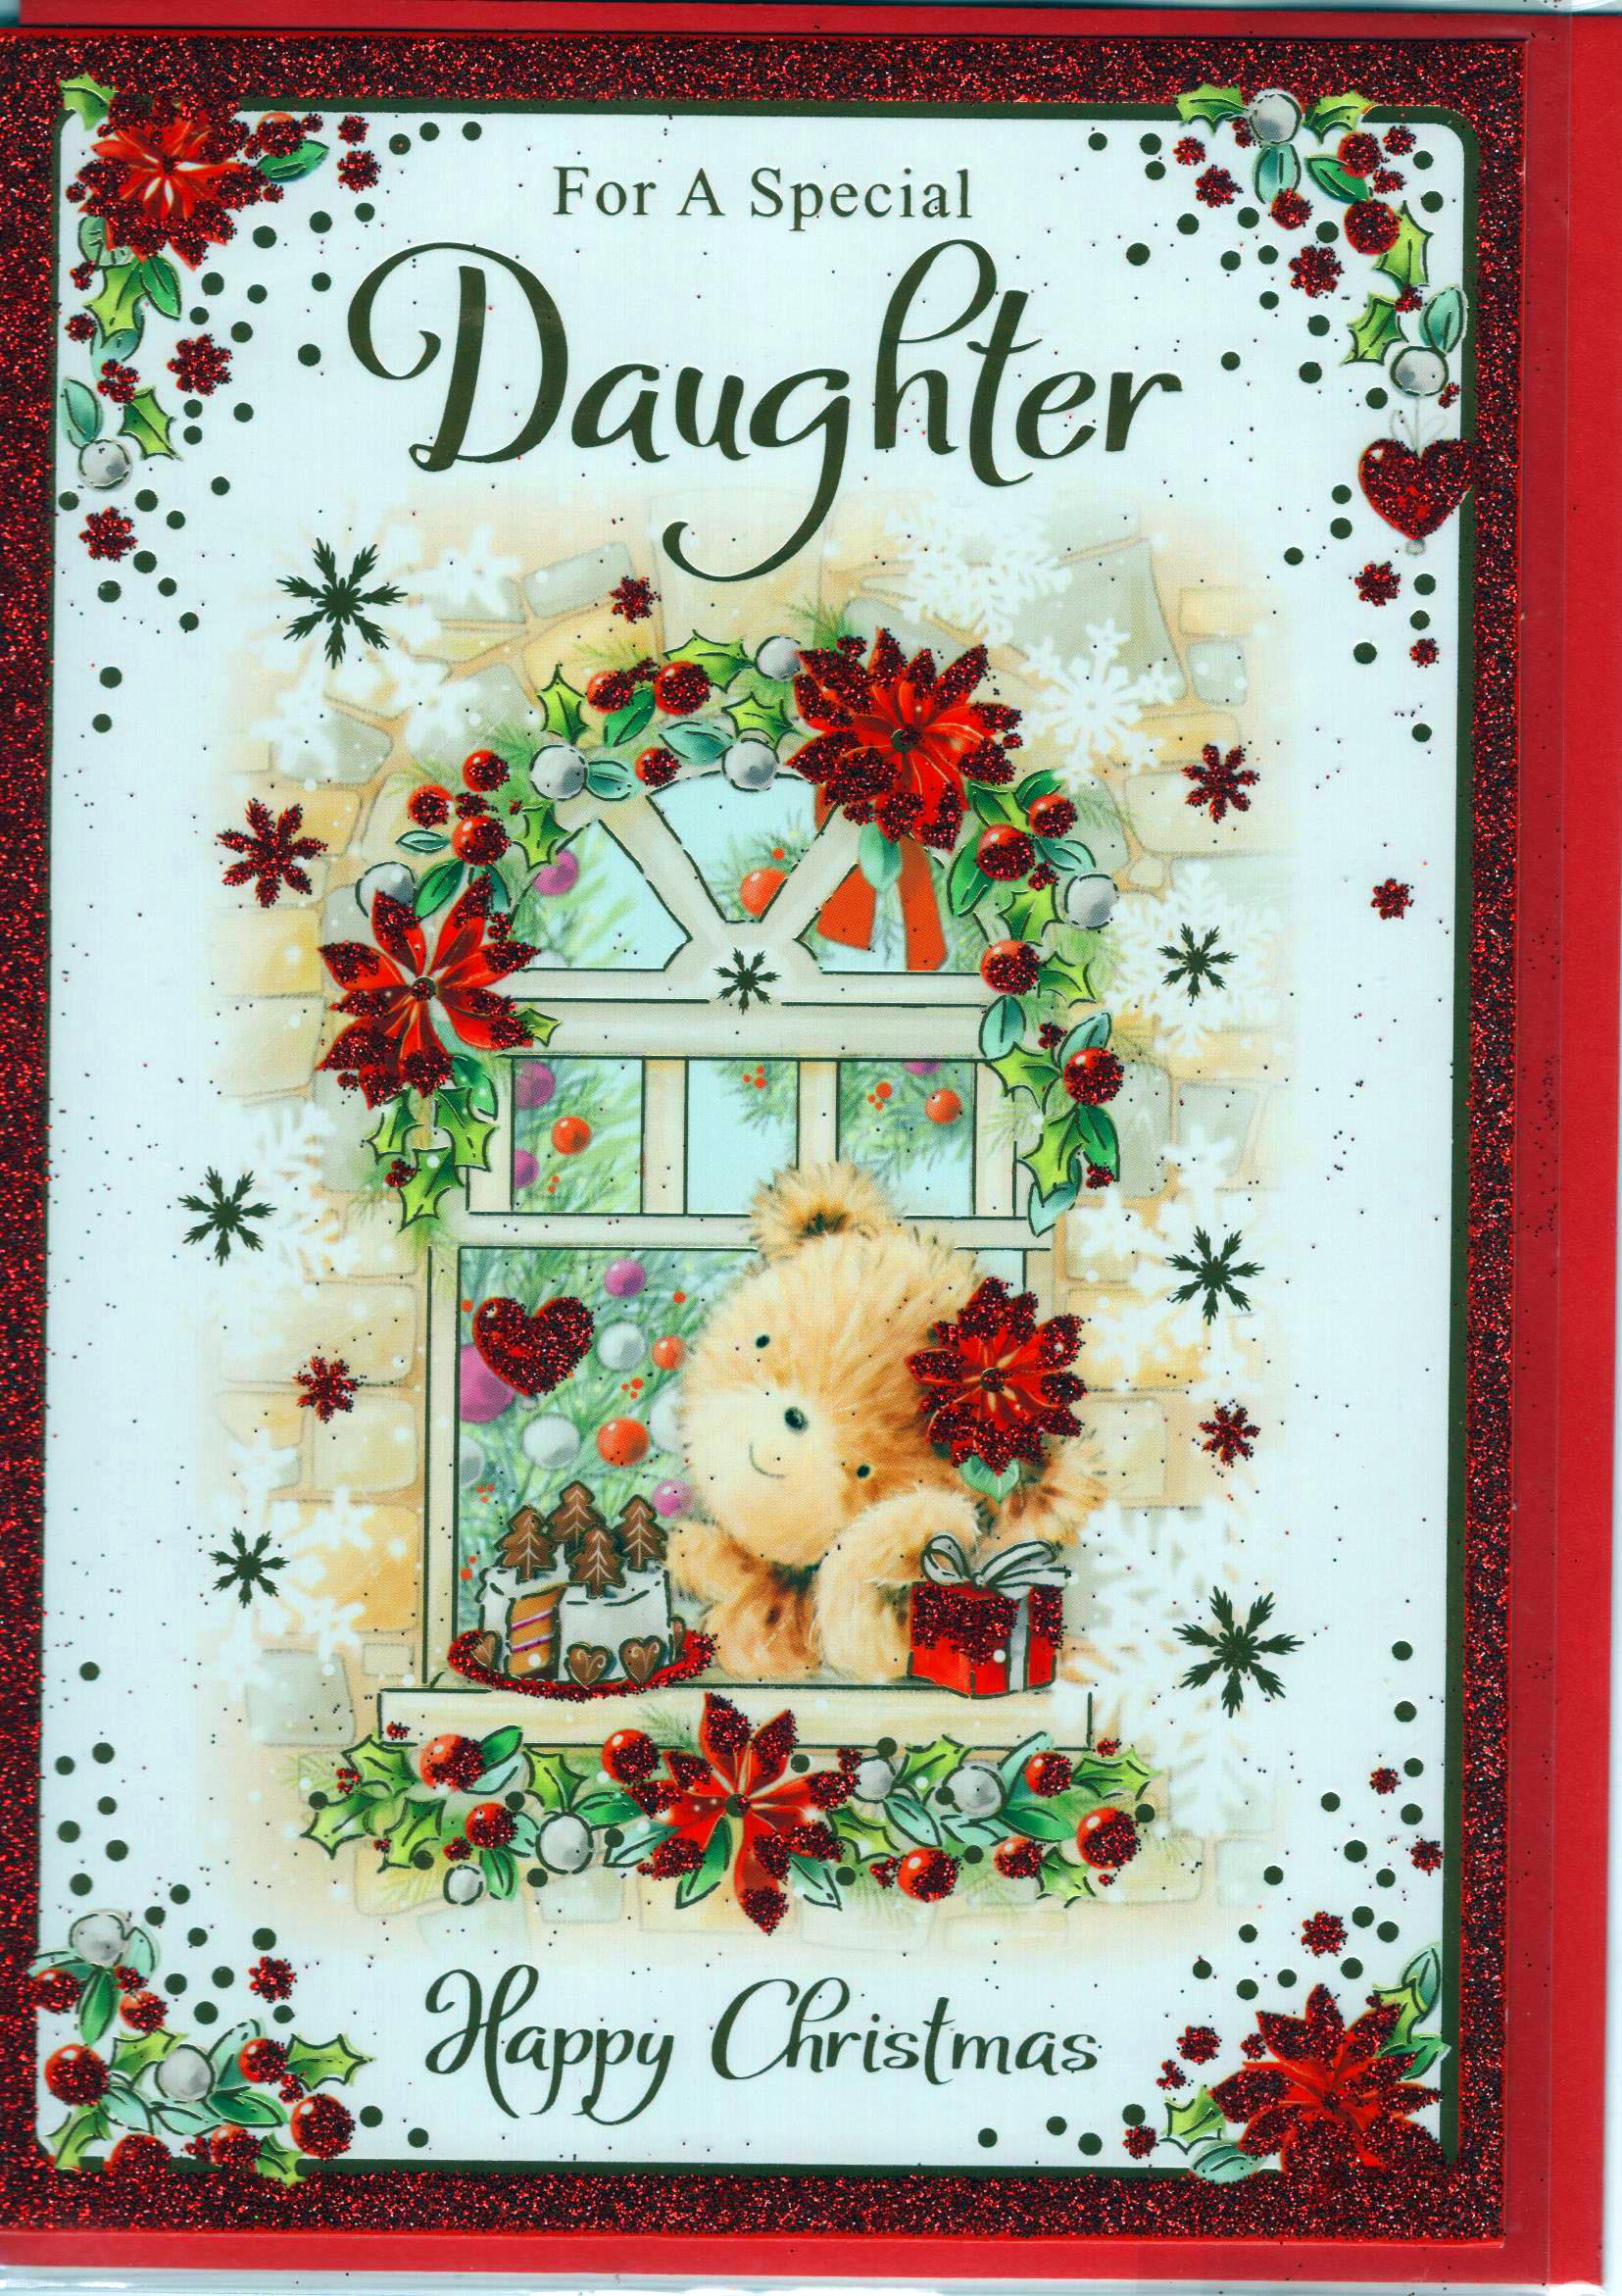 For a Special Daughter Happy Christmas 